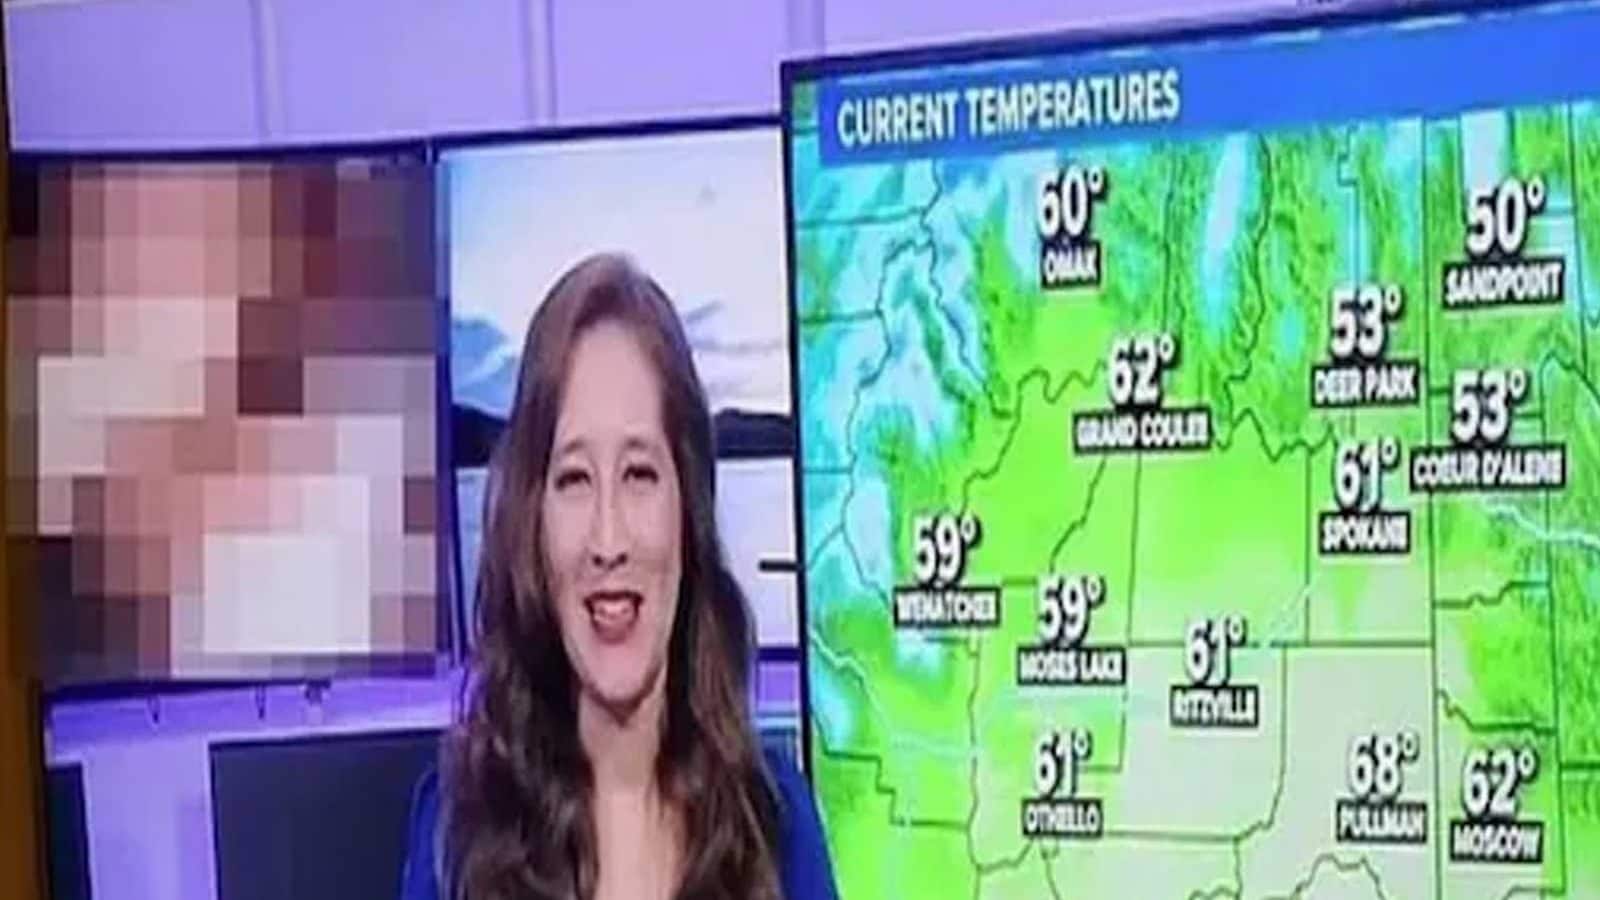 Tv News - US News Channel Accidentally Broadcasts 13-second Porn Video